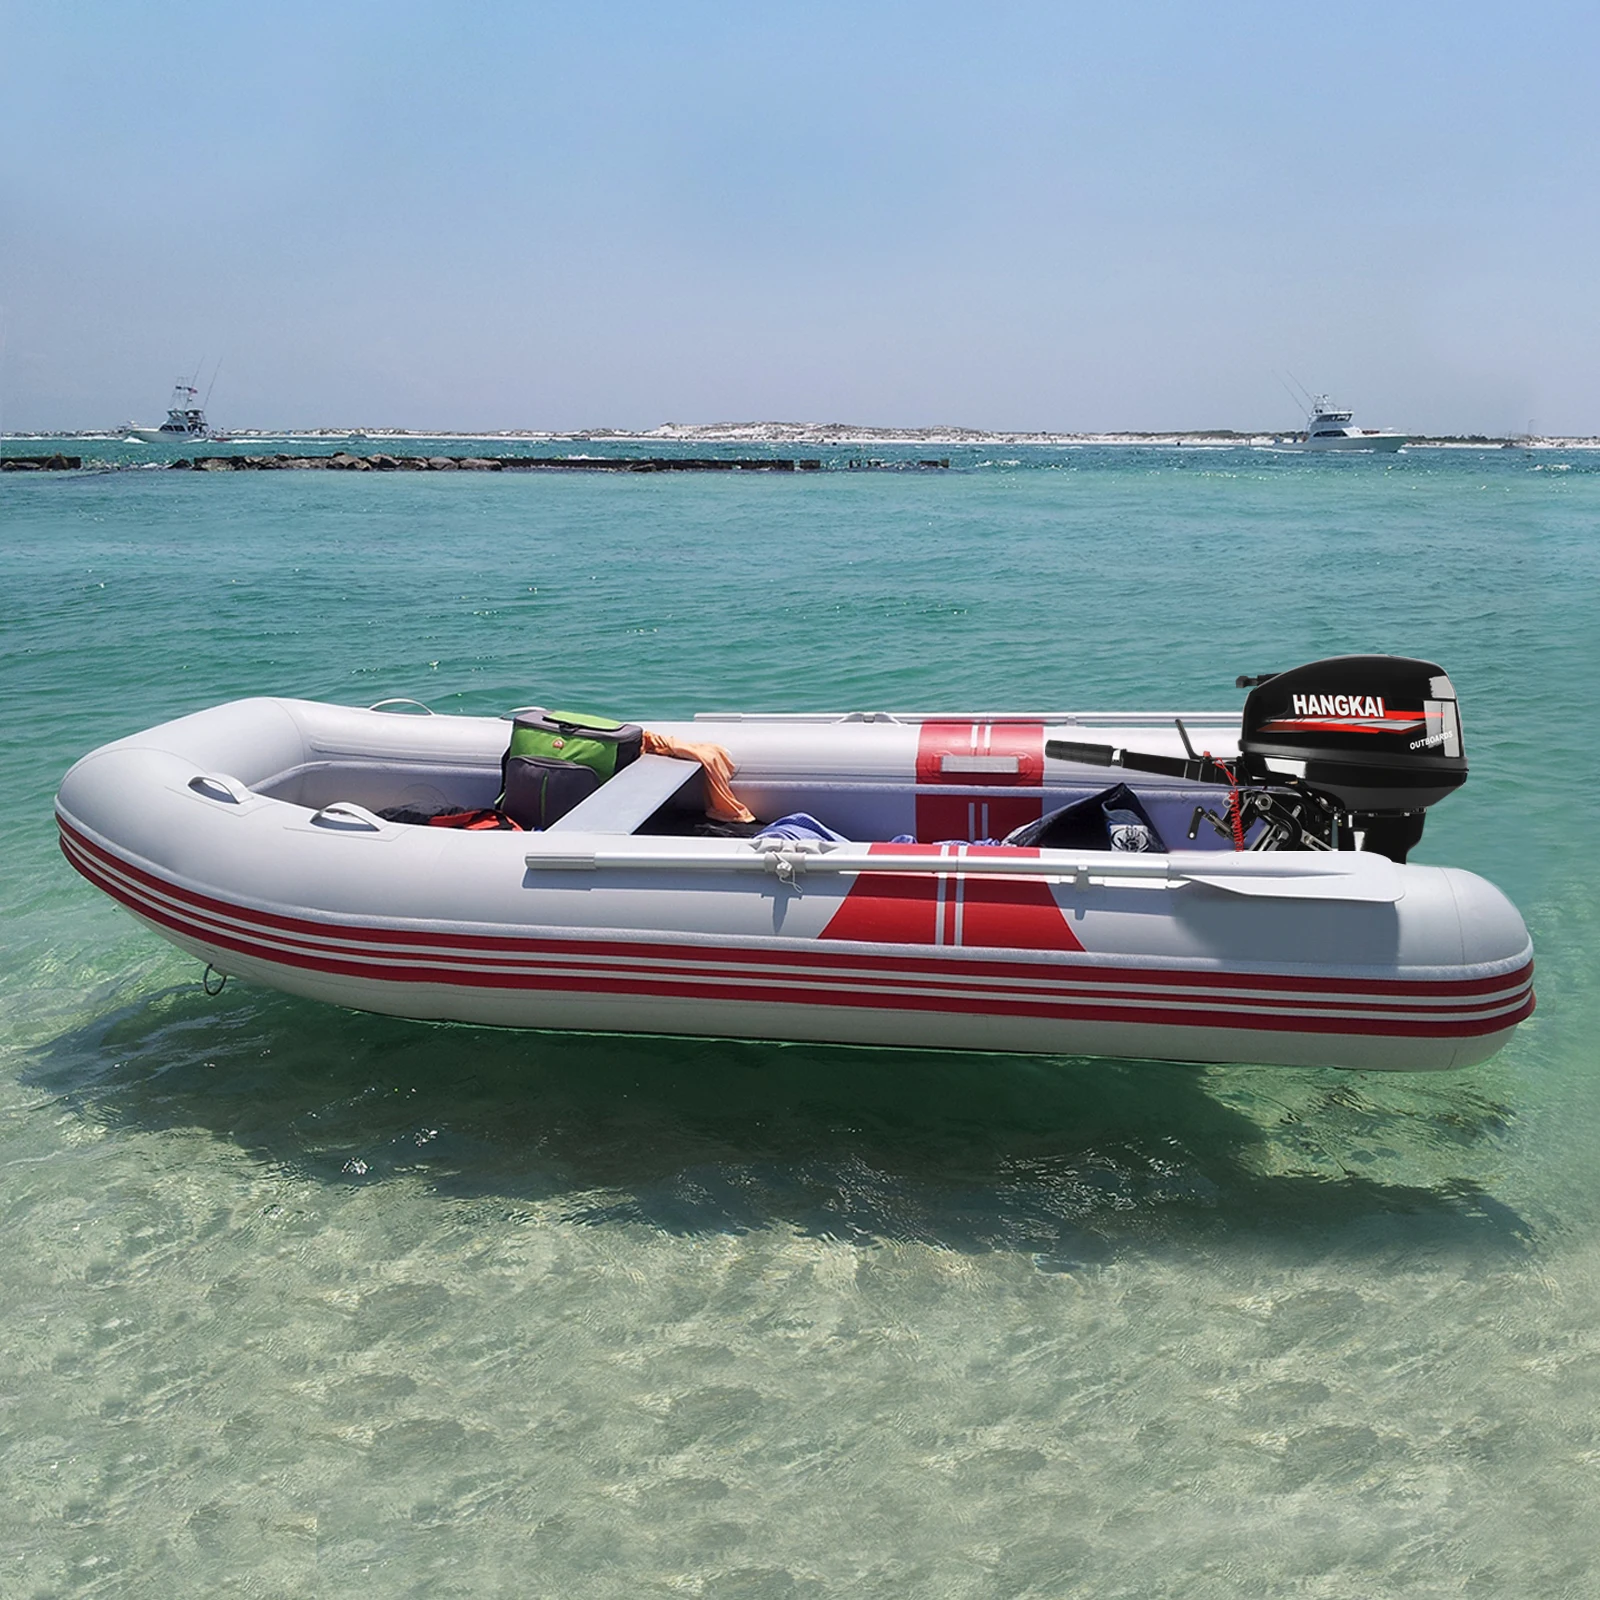 Hangkai 18 HP Boat Outboard Motor Long Shaft, 2 Strokes Inflatable Gasolina Boat Outboard Engine,Water Cooling System 48cmx20m cicada wing long roll white pearlescent mica thin chinese art paper copy strokes calligraphy works rice paper